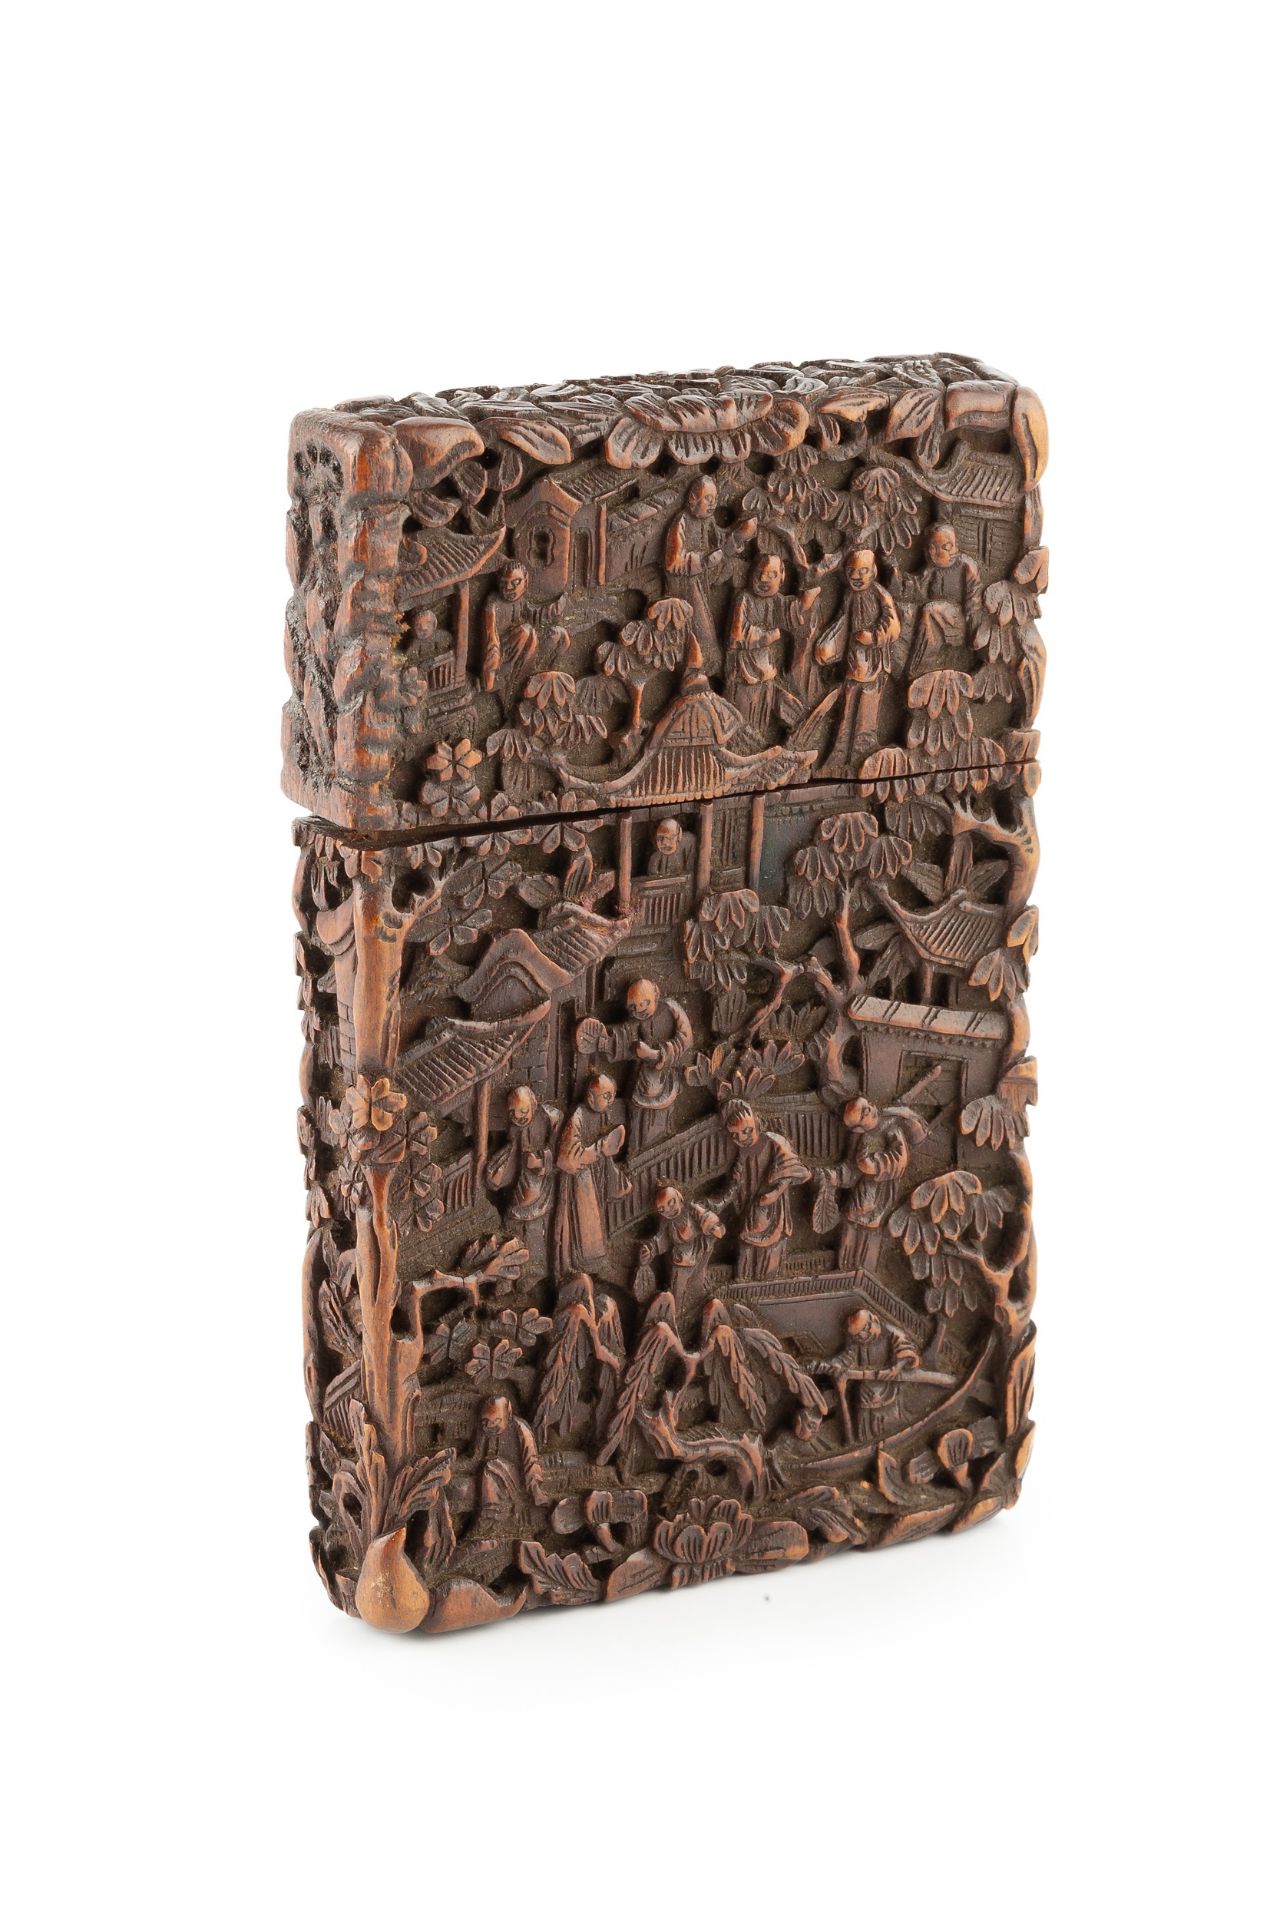 A 19th century Chinese export carved hardwood card case, intricately carved with figures amidst